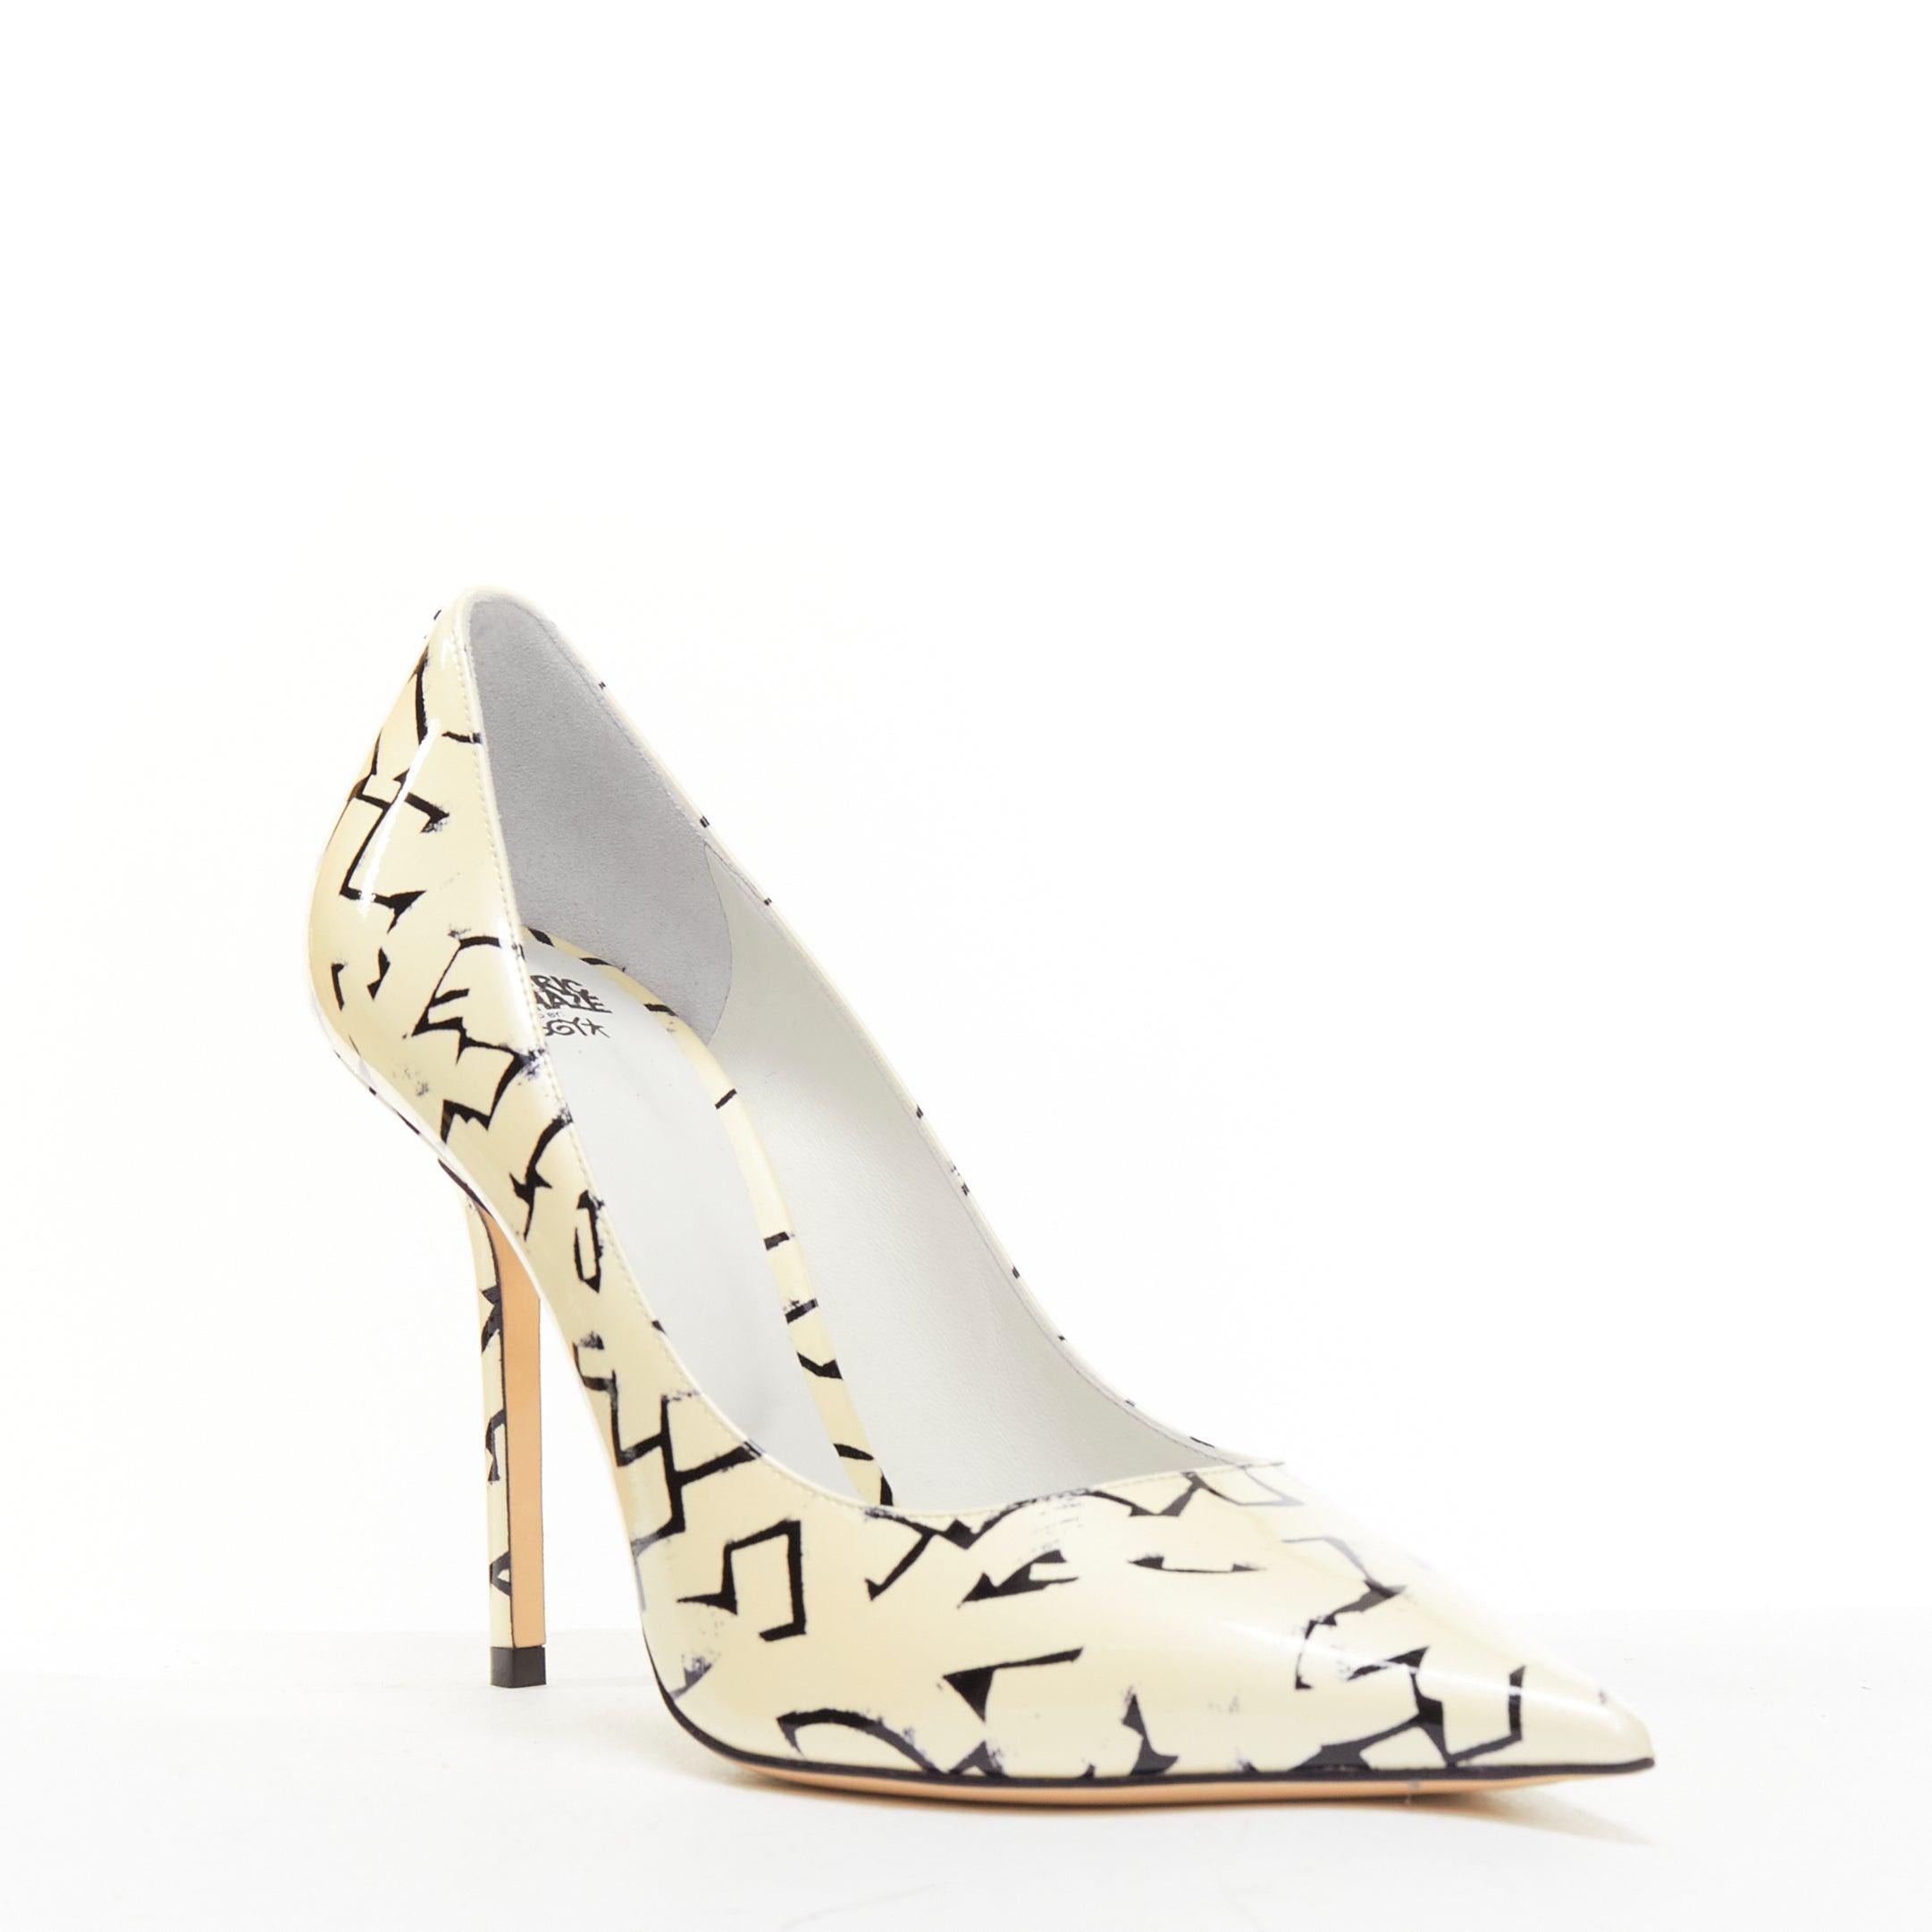 JIMMY CHOO ERIC HAZE Poggy black graphics pearl leather pumps EU38.5
Reference: BSHW/A00163
Brand: Jimmy Choo
Model: Poggy
Collection: Eric Haze
Material: Leather
Color: Pearl, Black
Pattern: Abstract
Lining: White Leather
Extra Details: Stiletto